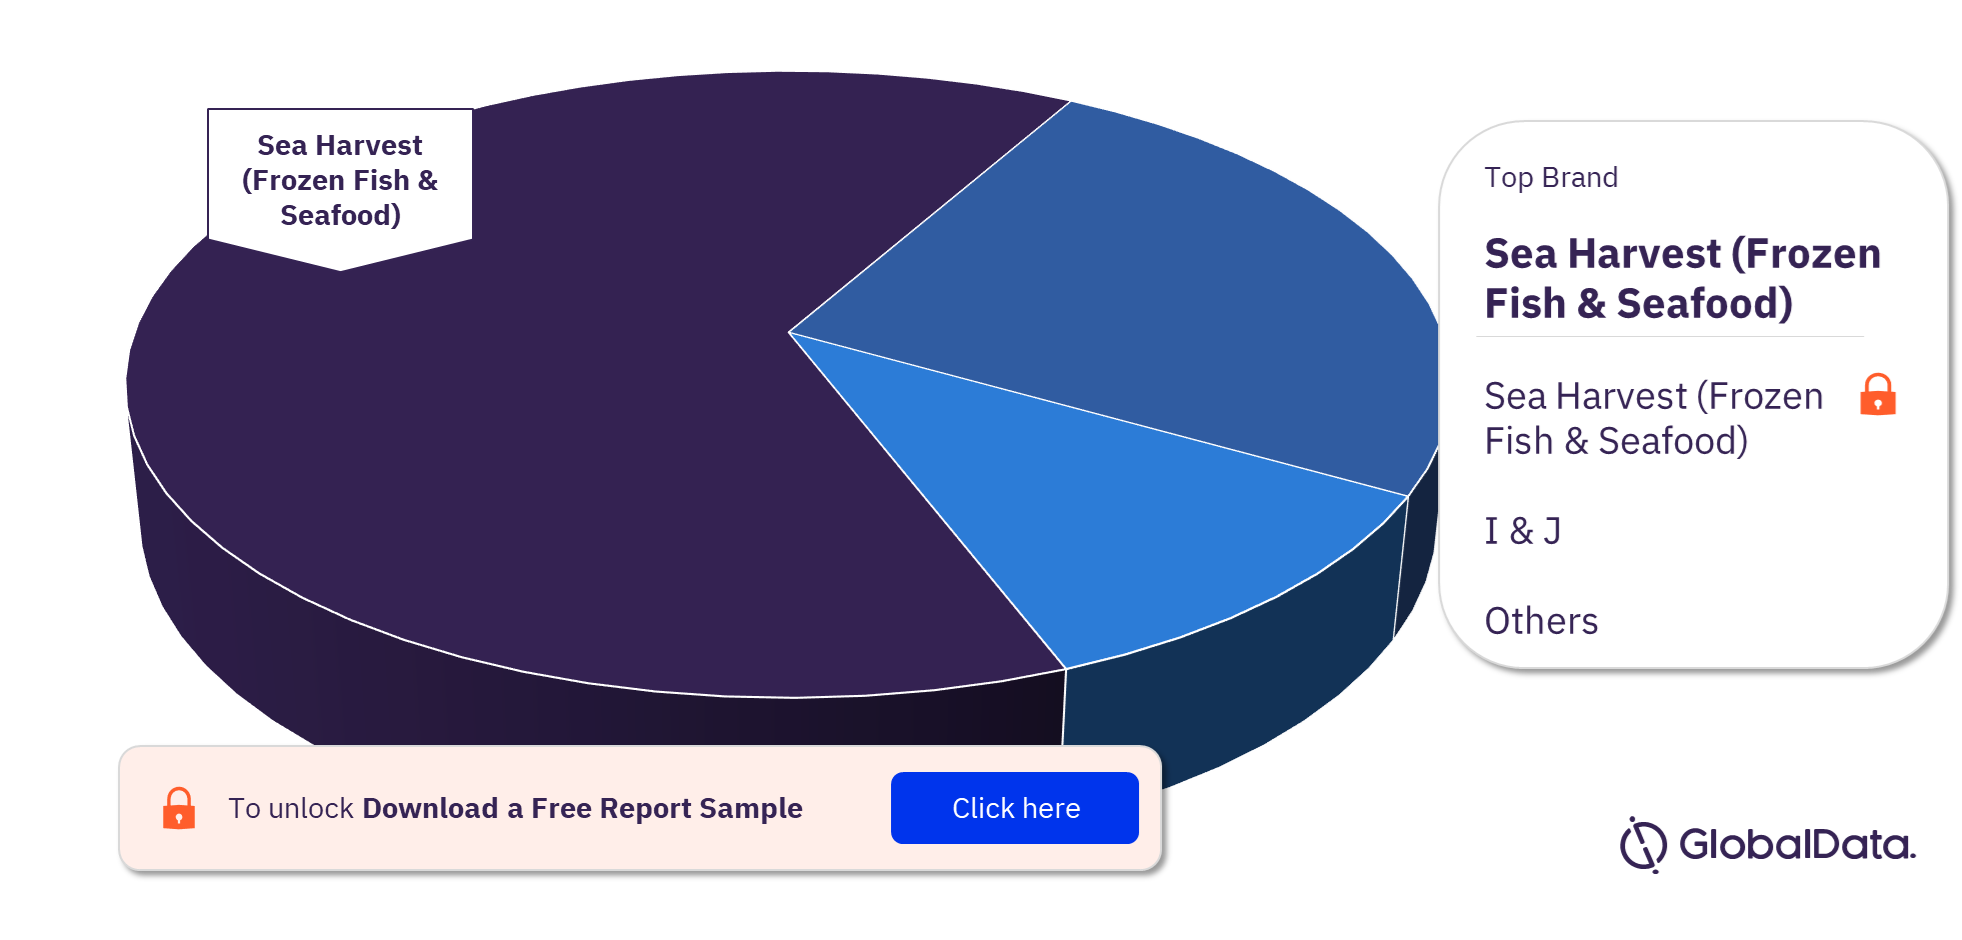 South Africa Frozen Fish and Seafood Market Analysis, by Brands, 2021 (%)